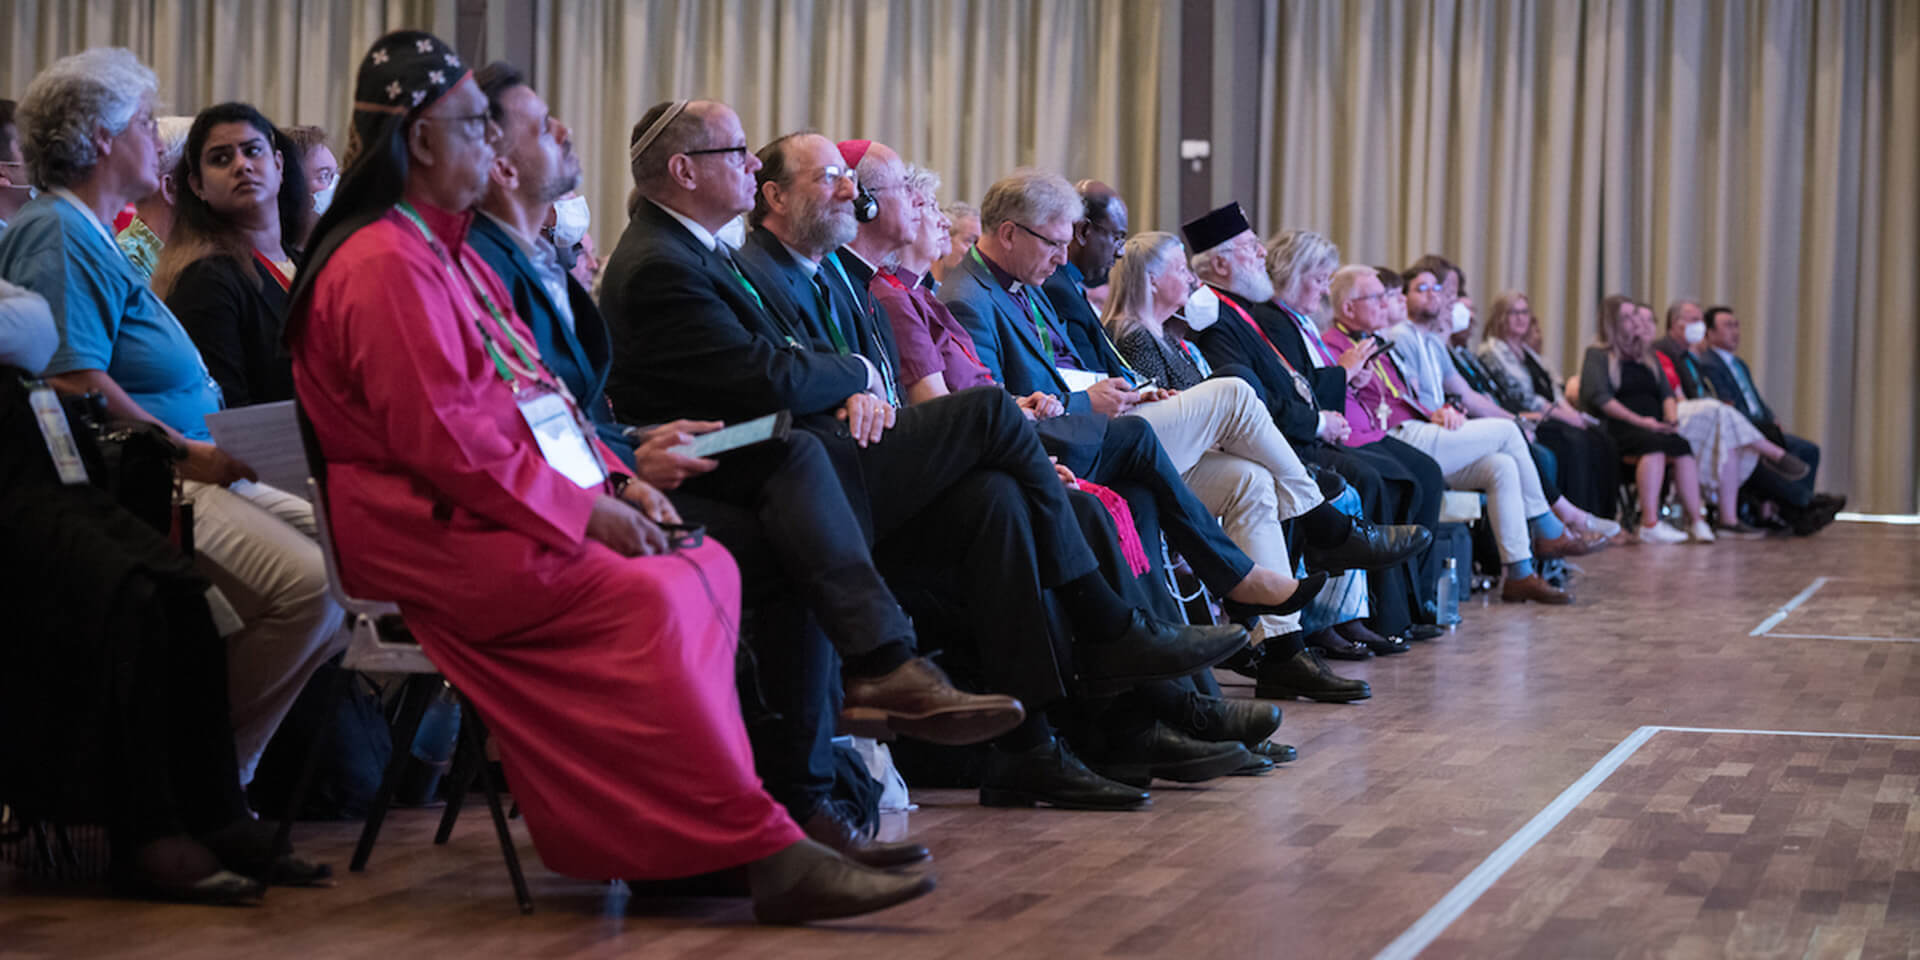 Assembly participants attend a thematic plenary focused on ’Christian Unity and the Churches’ ,© Albin Hillert/WCC